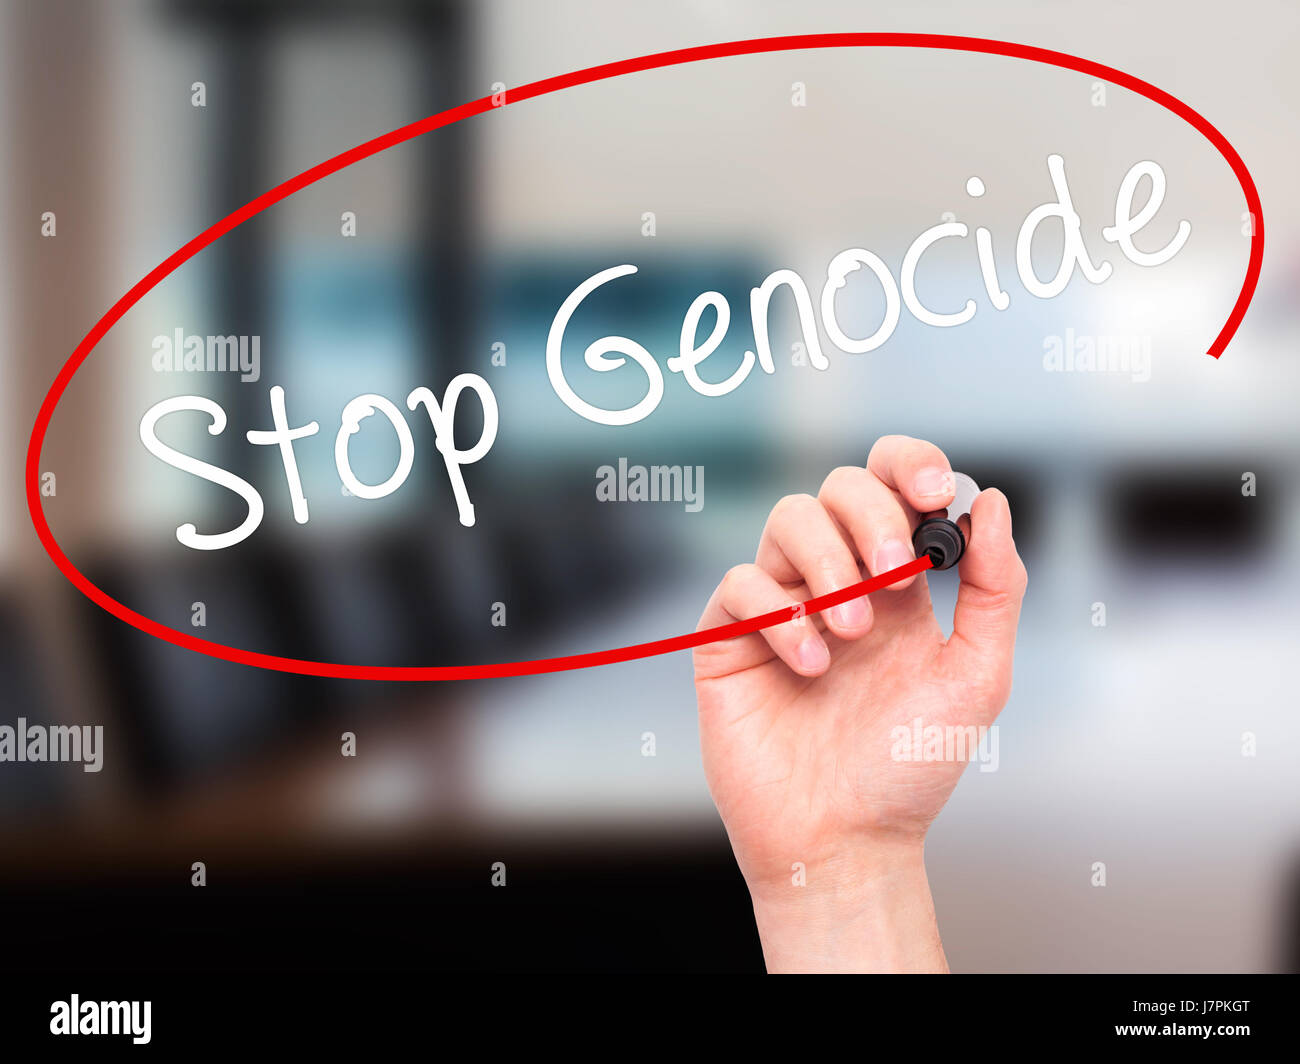 Man Hand writing Stop Genocide with black marker on visual screen. Isolated on background. Business, technology, internet concept. Stock Photo Stock Photo